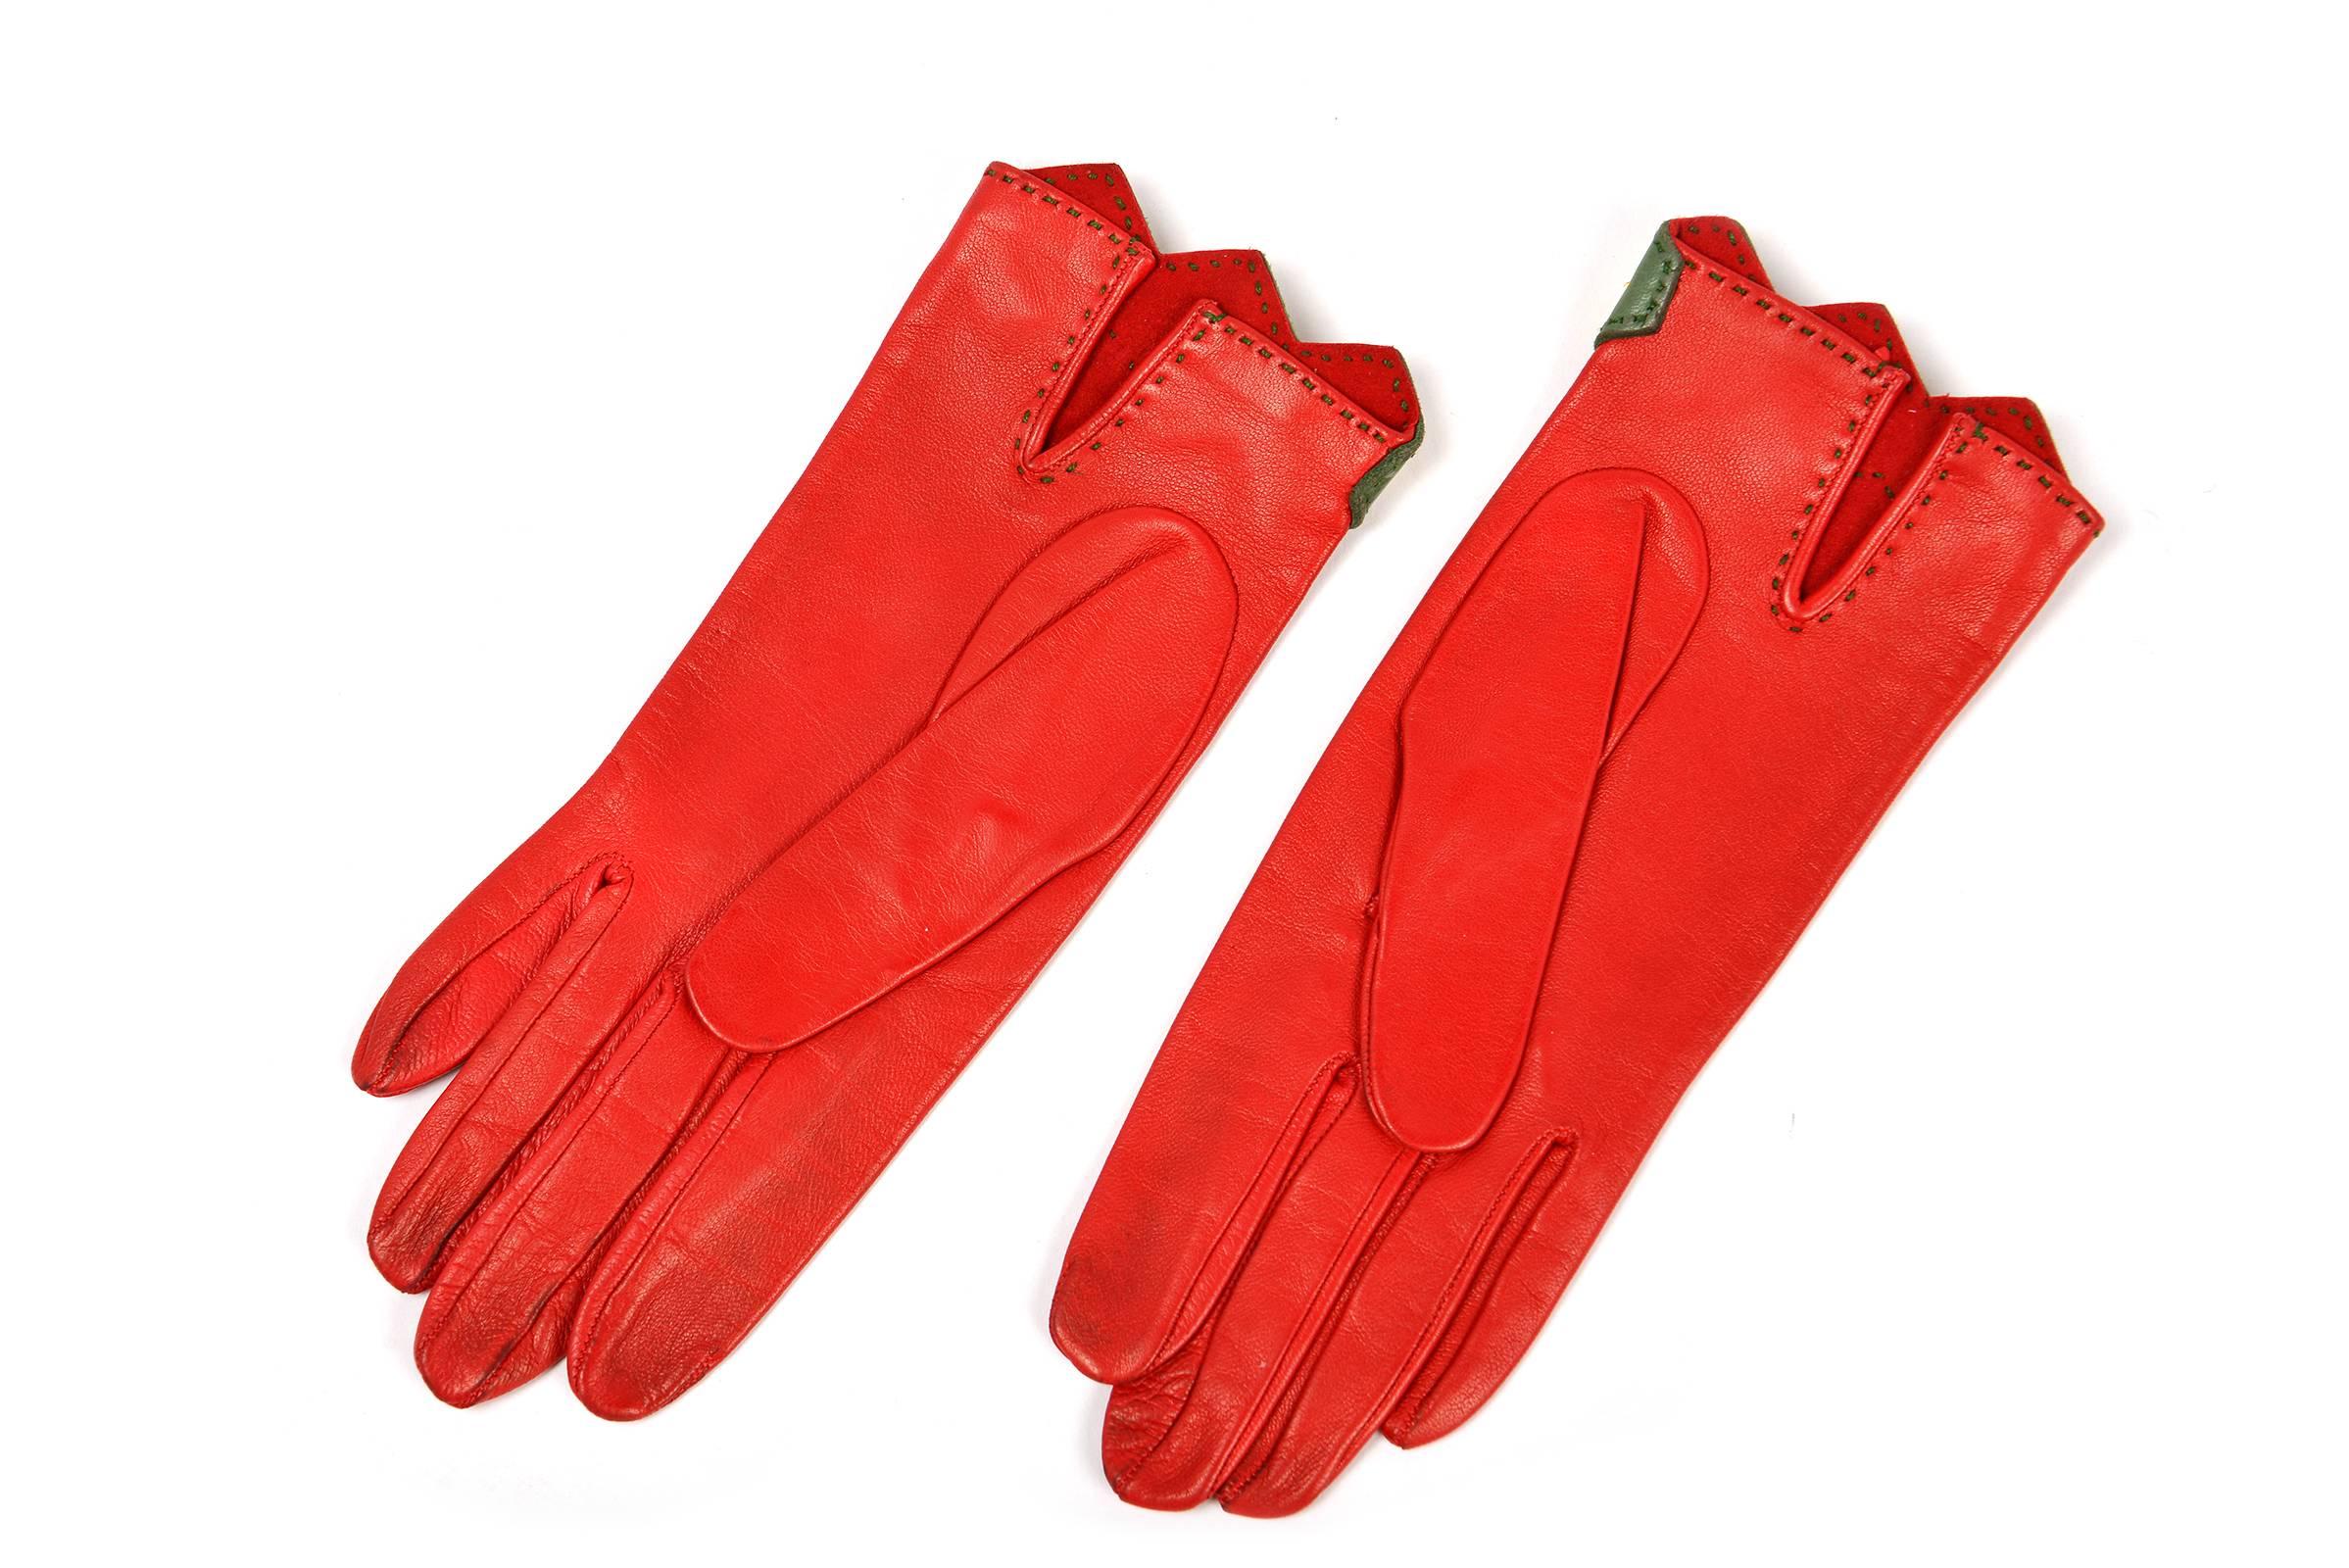 
Brilliant red leather gloves with green leather trim and gold metal studs.  A pop of green top-stitching along the green leather strip continues to the back slit. Suede inside. A great accent to you winter wardrobe!
 
Modern US size 6 -